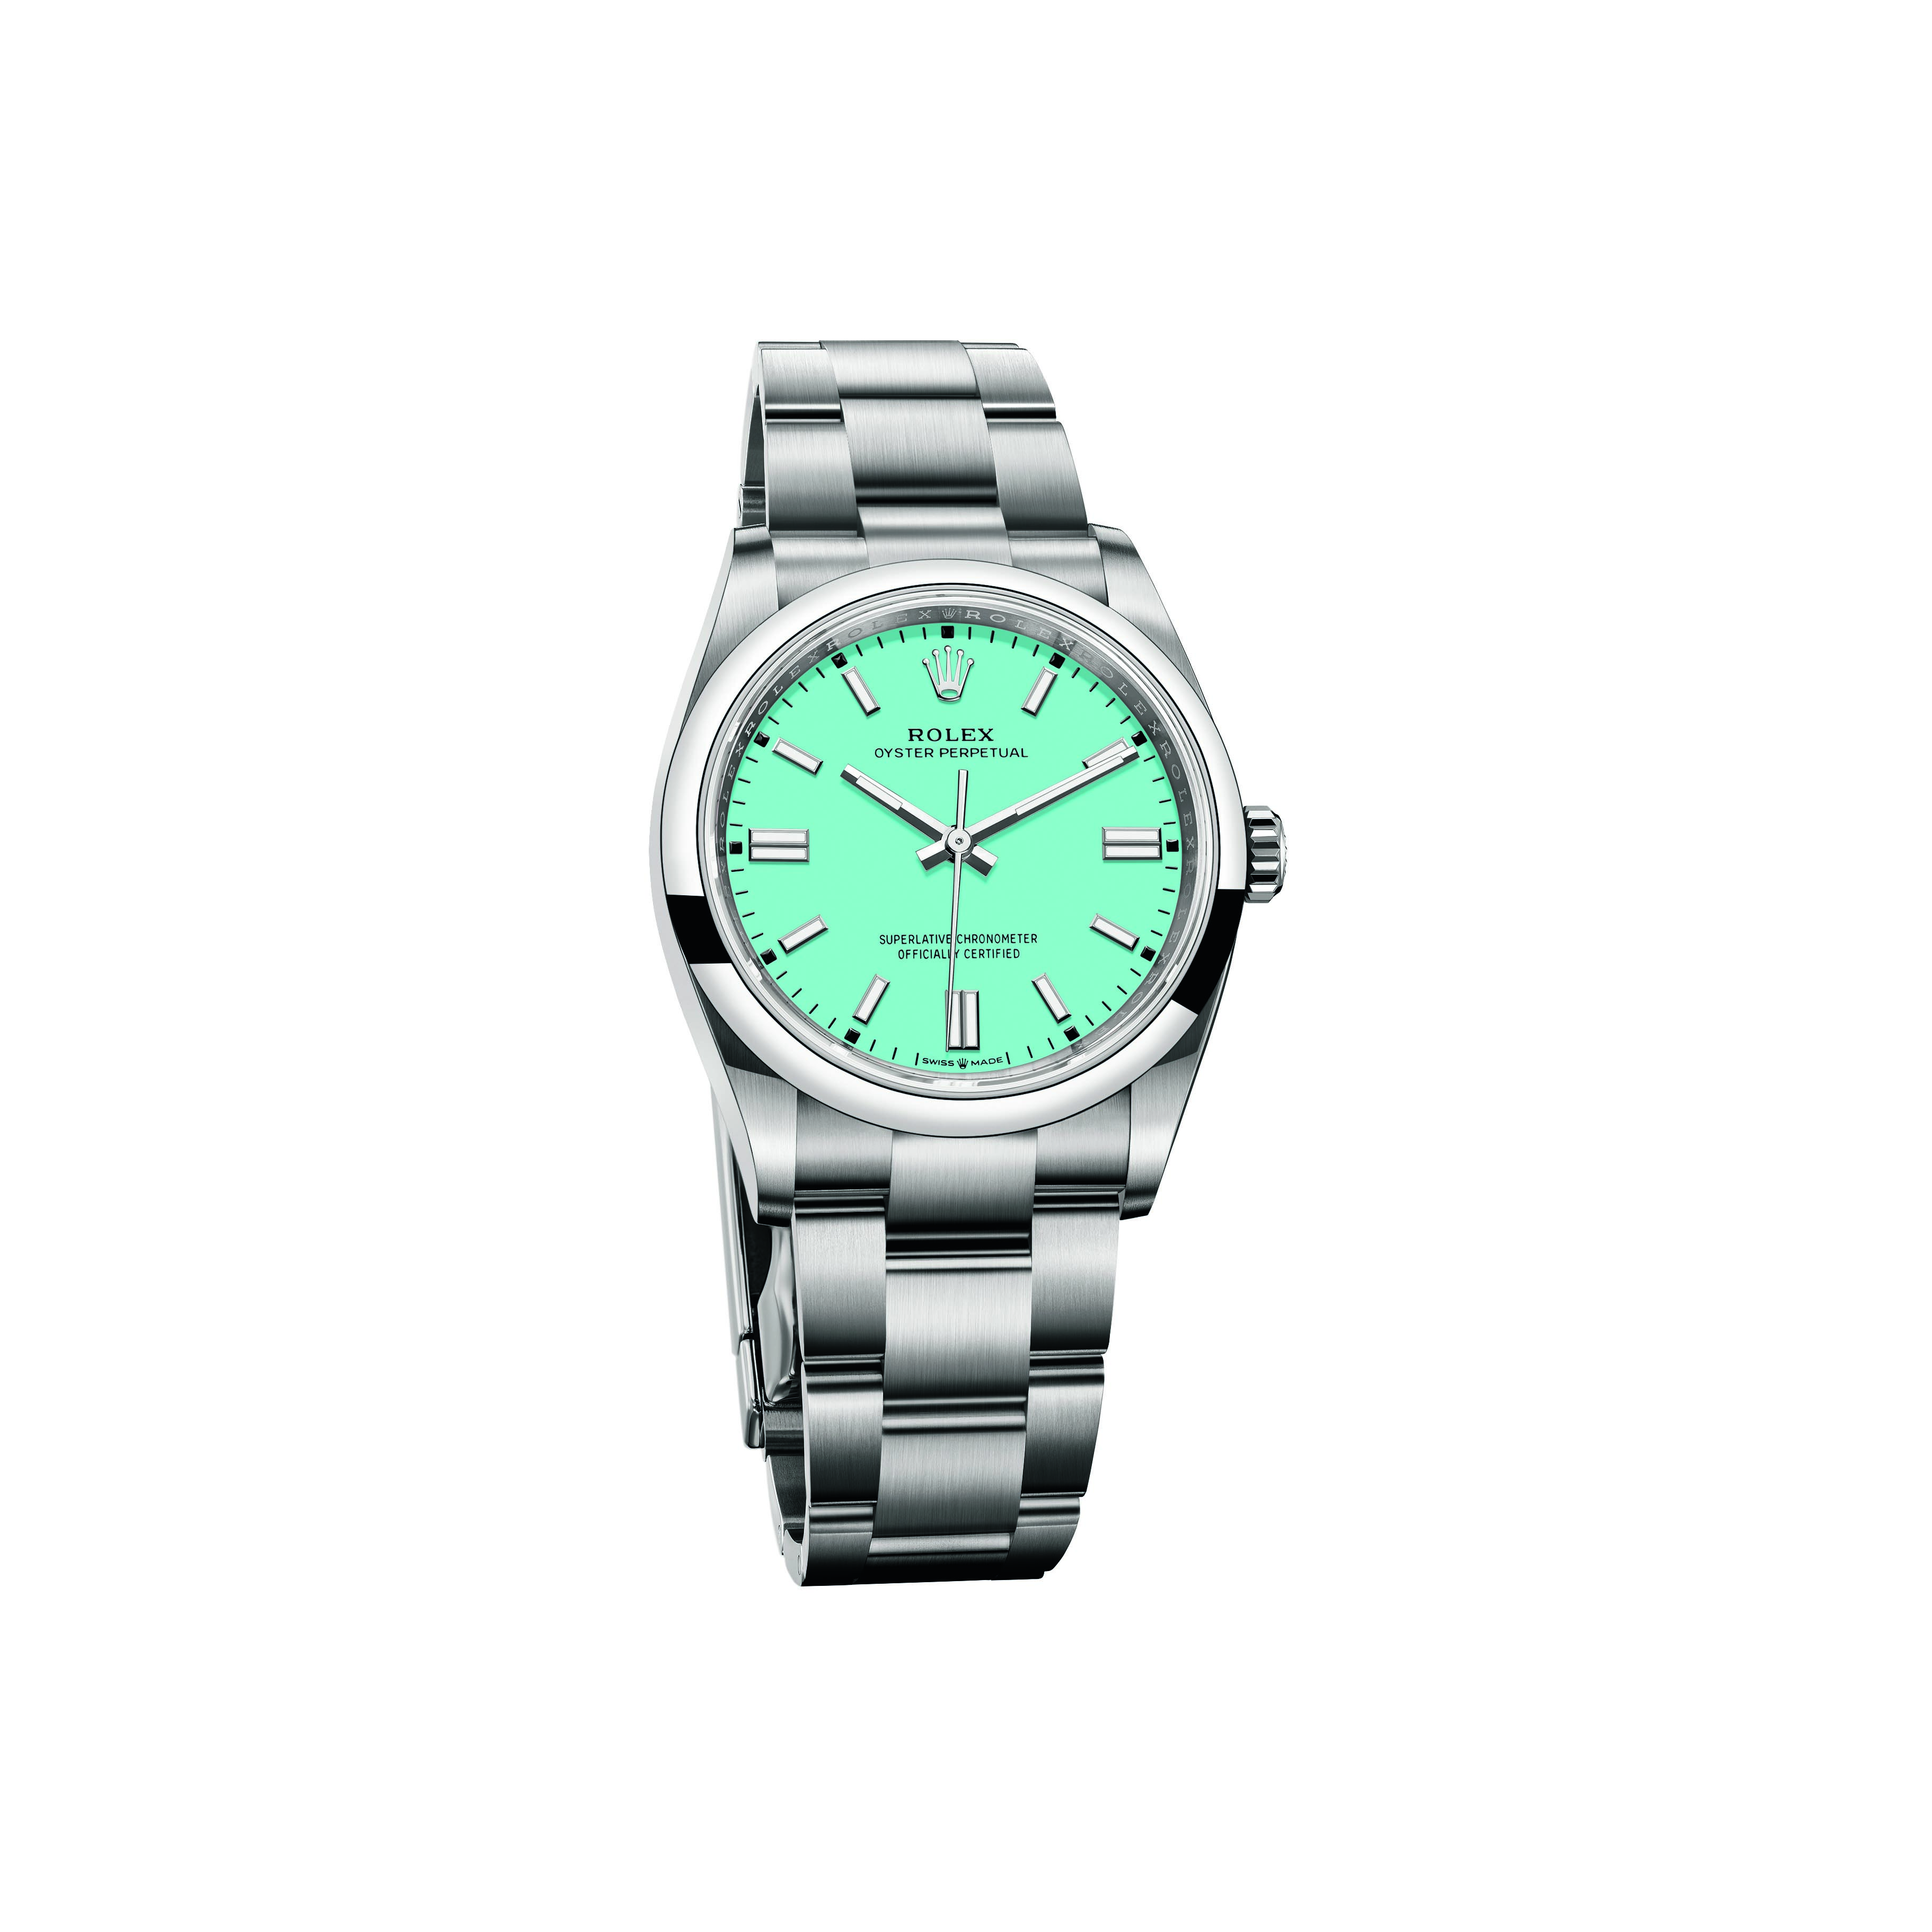 The Rolex Oyster Perpetual 36 With New 